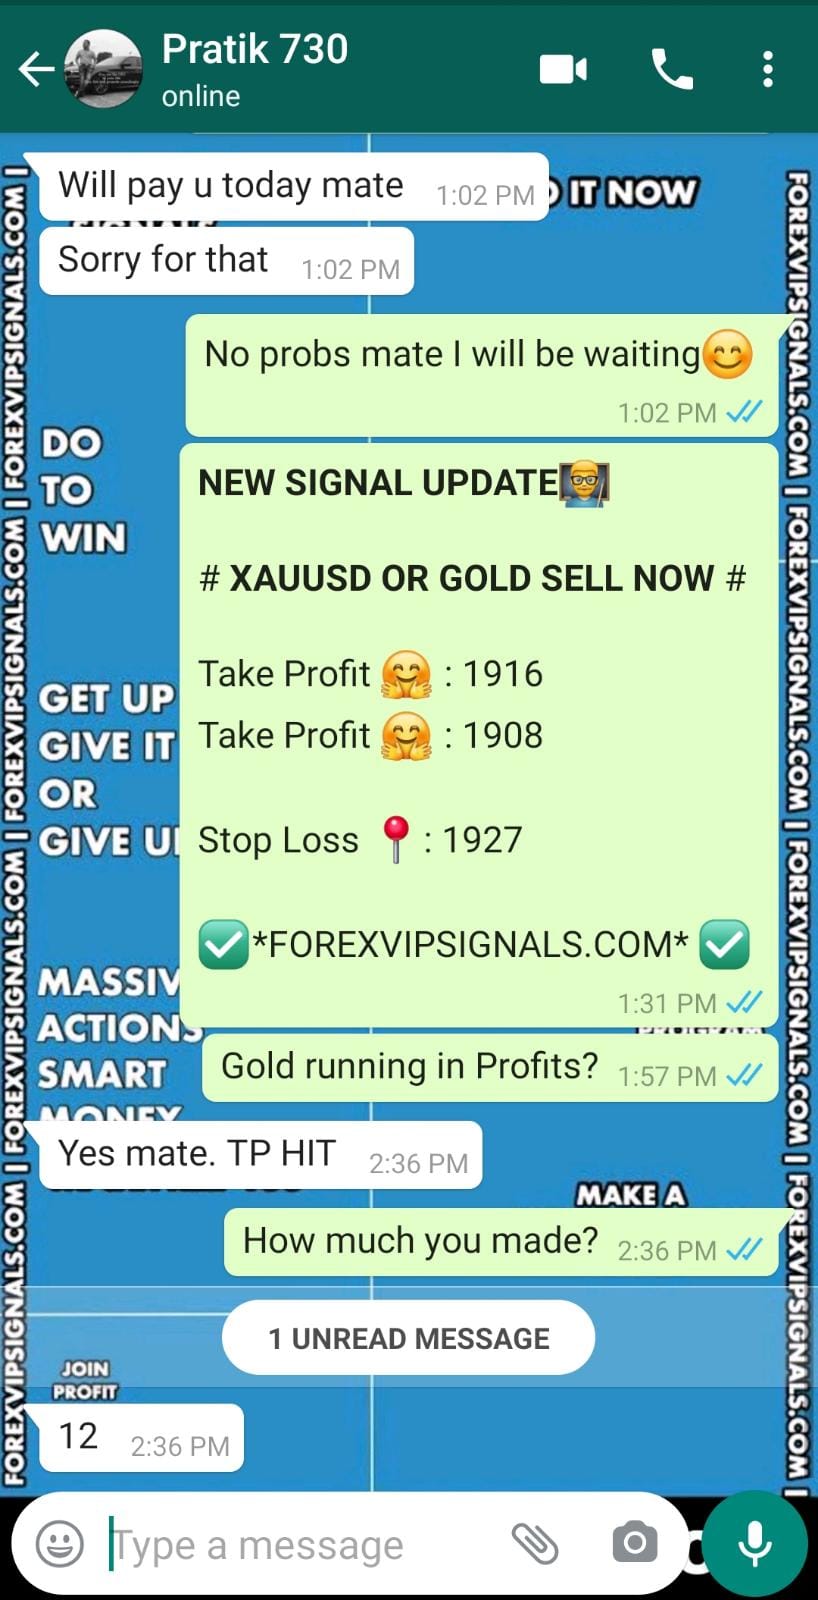 daily gold trading signals by forex vip signals